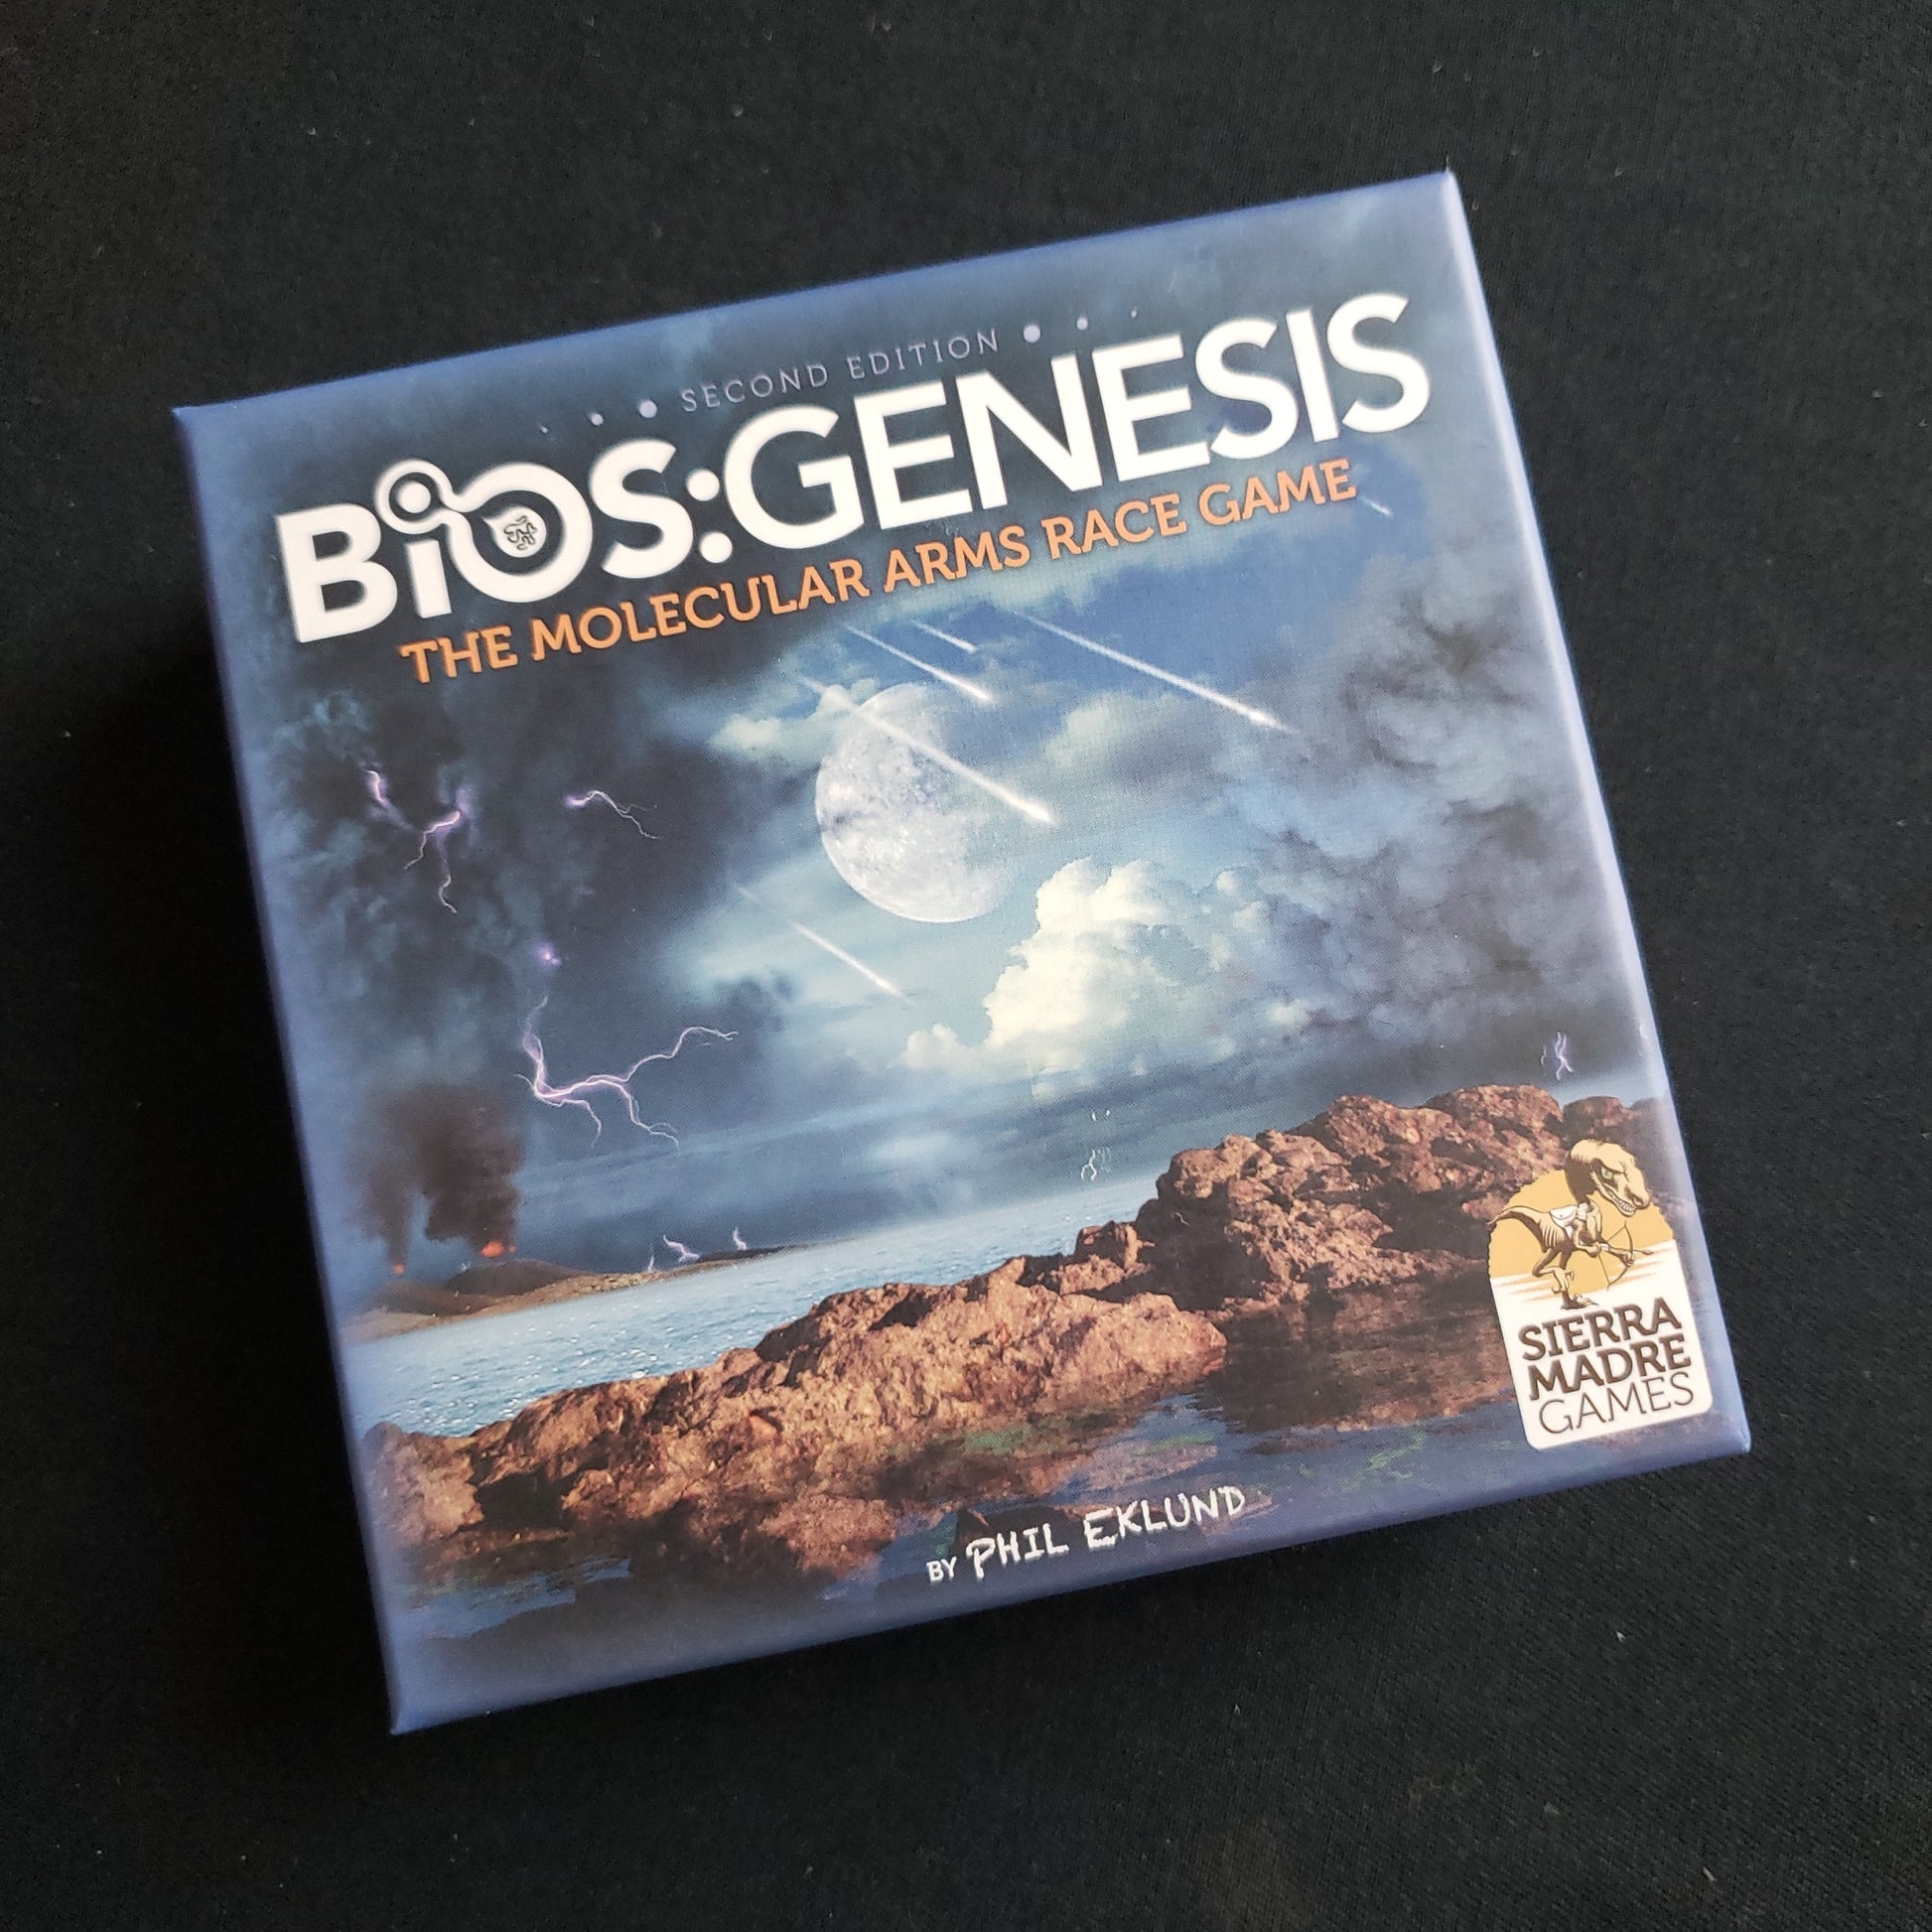 Image shows the front cover of the box of the Bios: Genesis board game